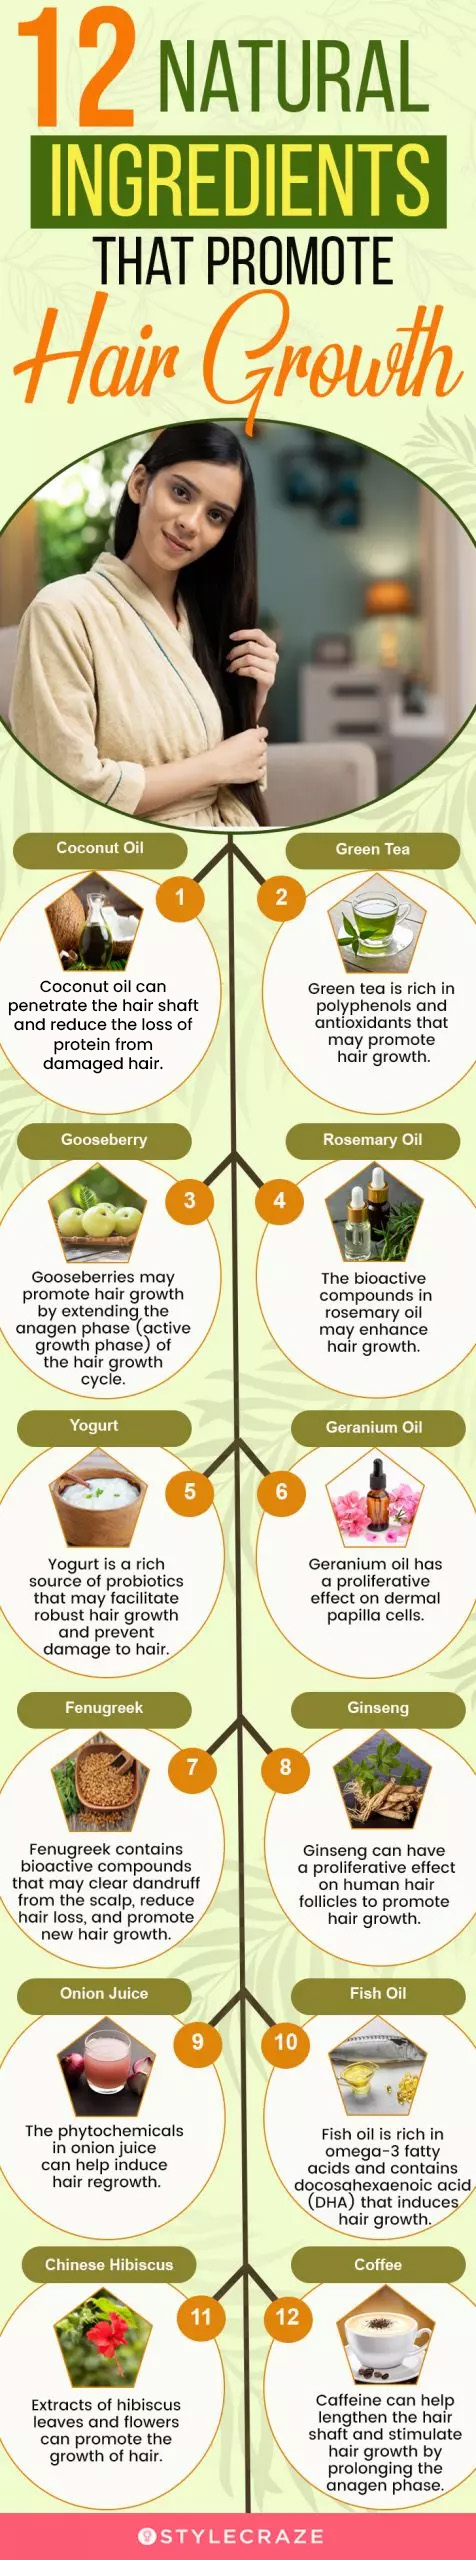 Best Foods for Hair Growth: What to Eat, Drink & Avoid